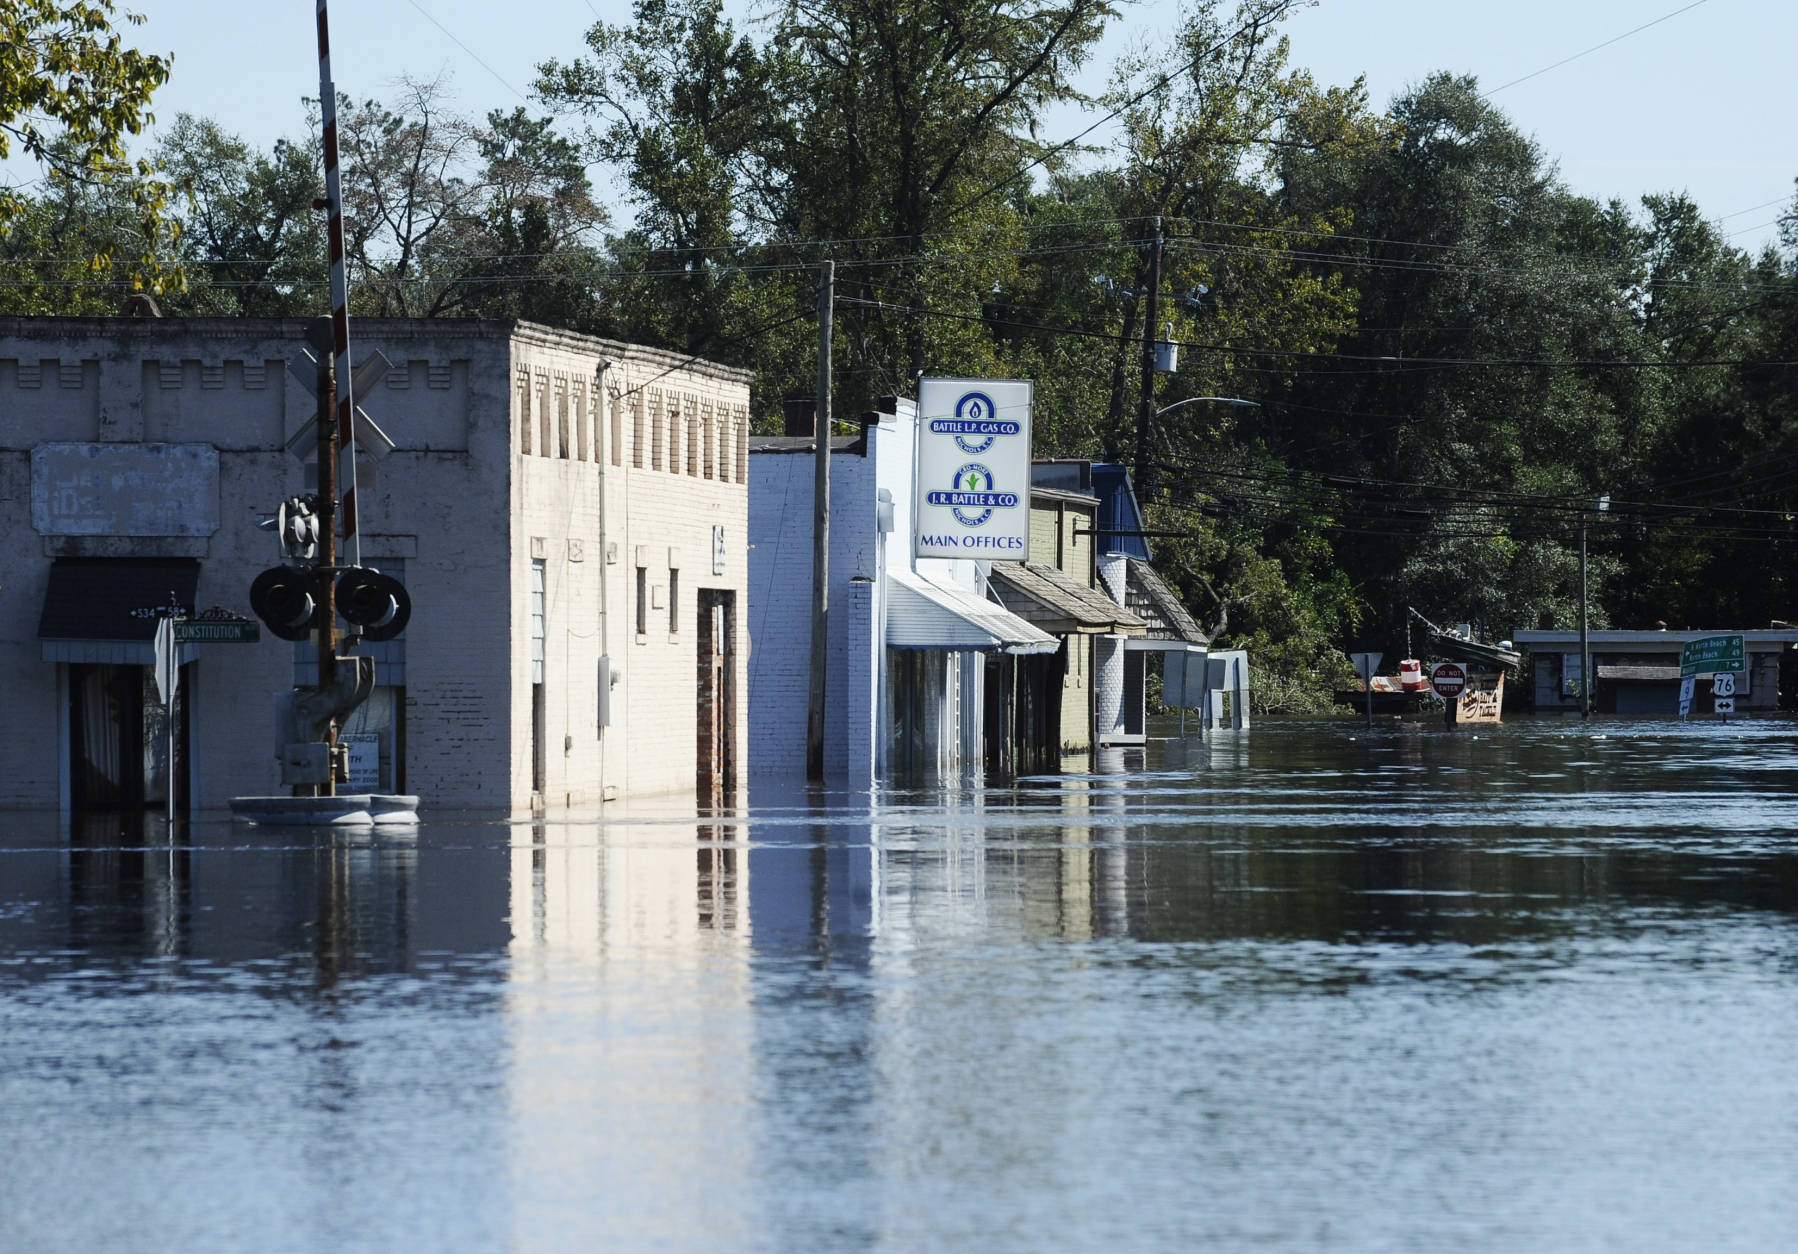 Floodwaters surround downtown Nichols, S.C. on Tuesday, Oct. 11, 2016.  About 150 people were rescued by boats from flooding in the riverside village of Nichols on Monday. (AP Photo/Rainier Ehrhardt)